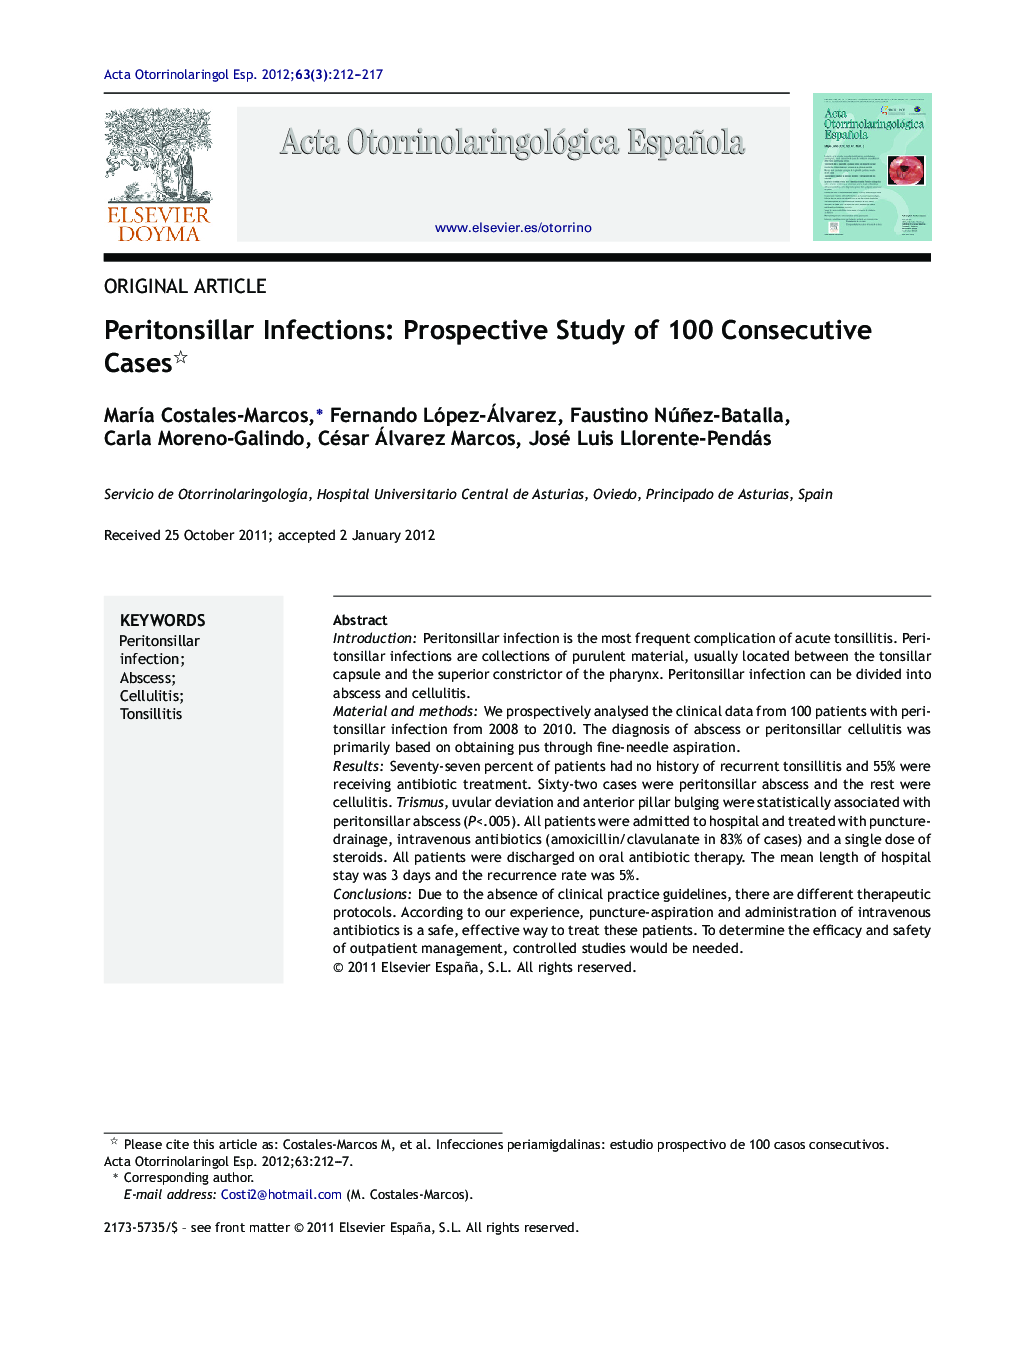 Peritonsillar Infections: Prospective Study of 100 Consecutive Cases 